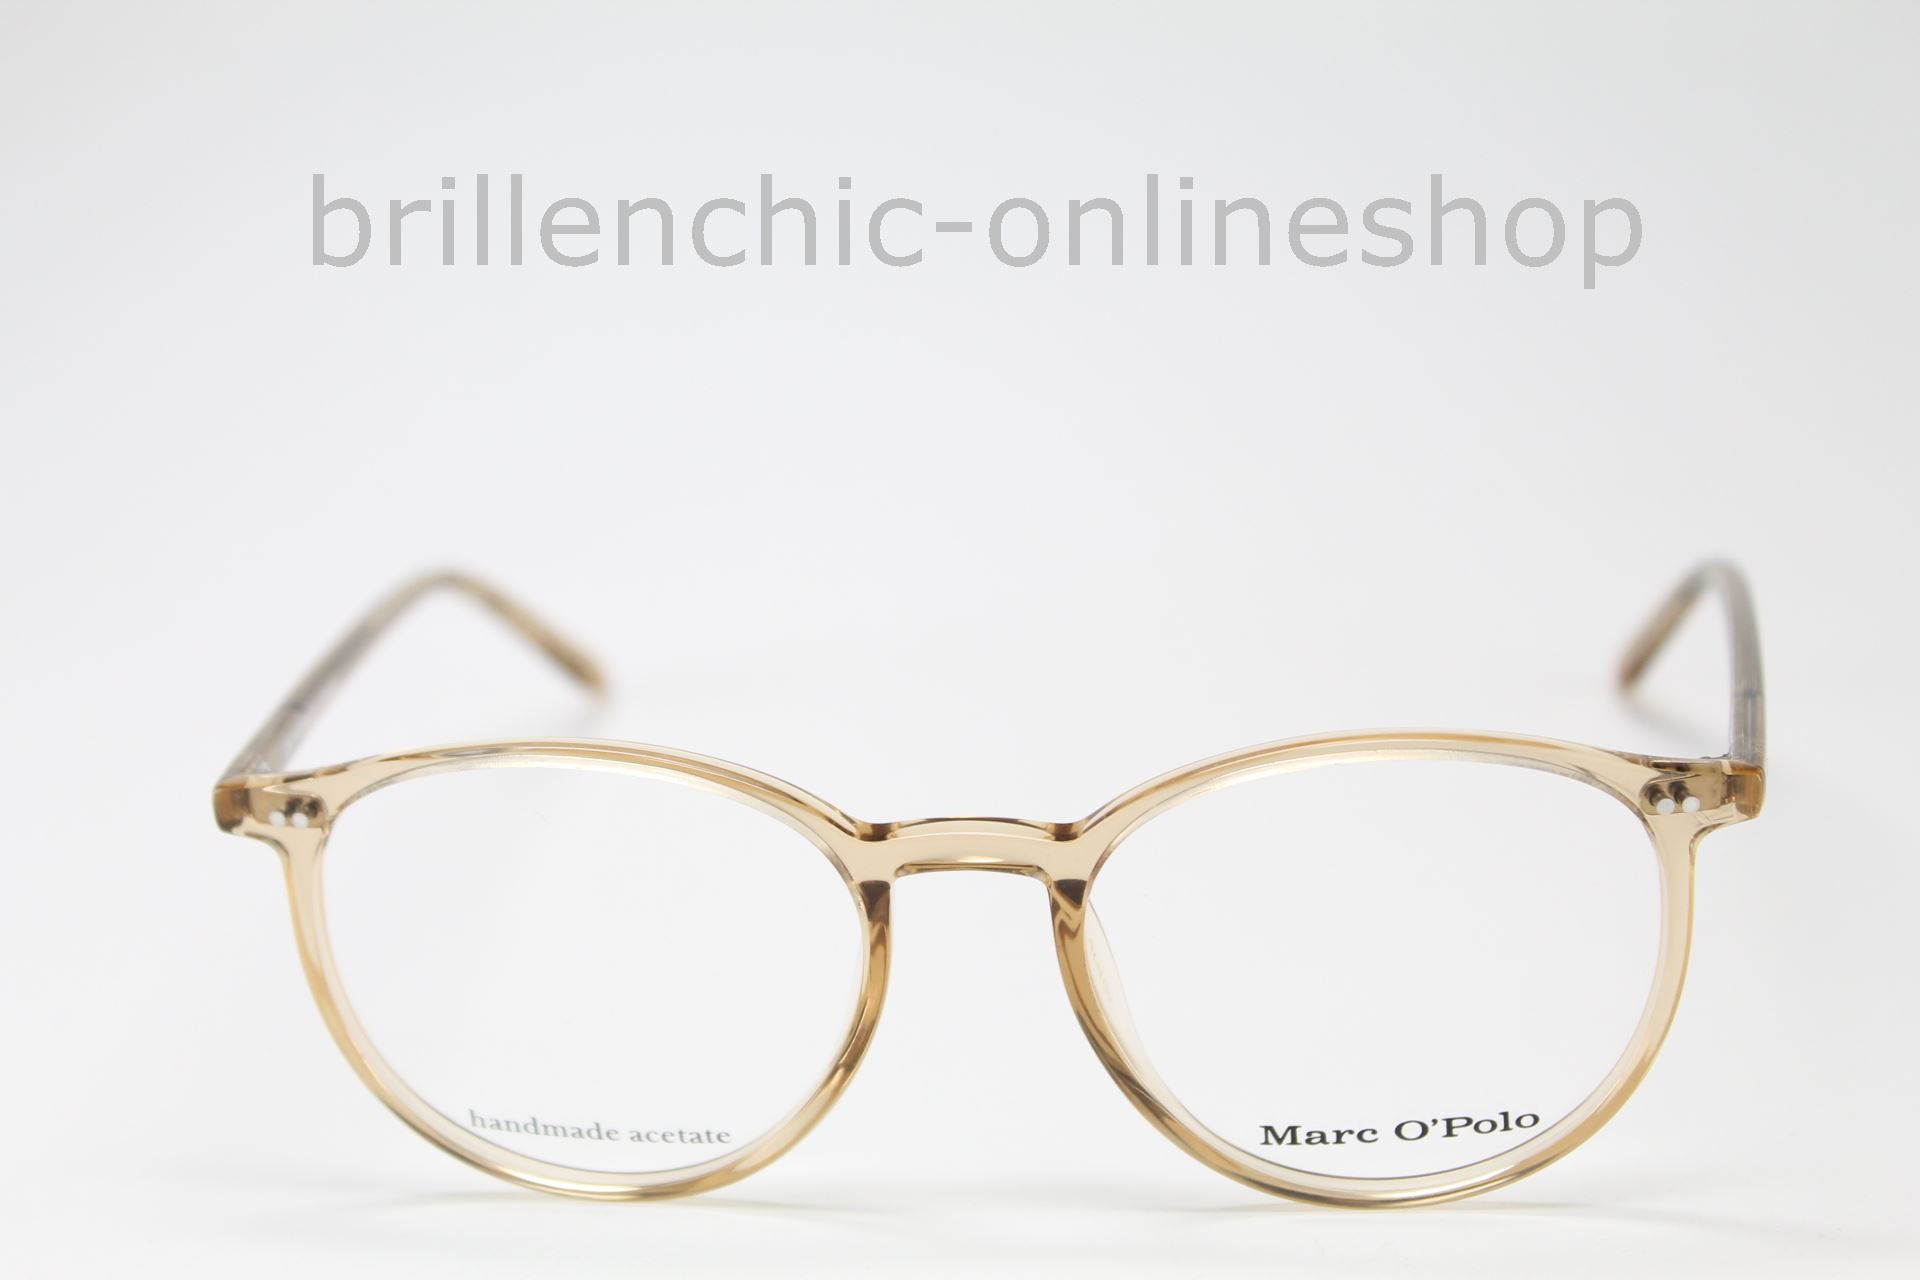 Brillenchic-onlineshop in Berlin - O'POLO 503084 80